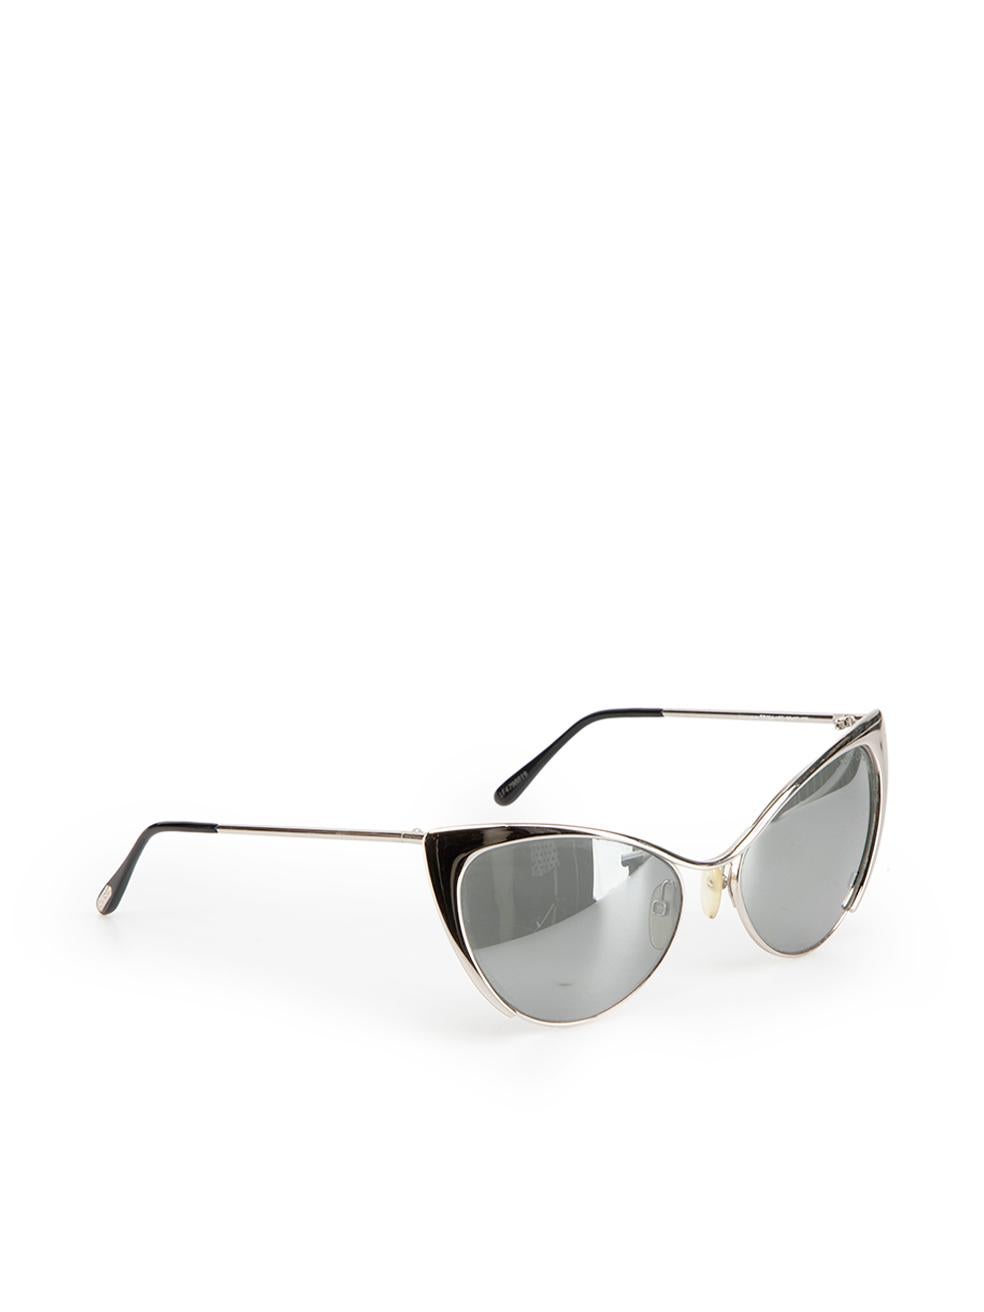 CONDITION is Very good. Minimal wear to sunglasses is evident. Minimal wear to the lenses with spotting to the mirrored effect on this used Tom Ford designer resale item. These sunglasses come with original